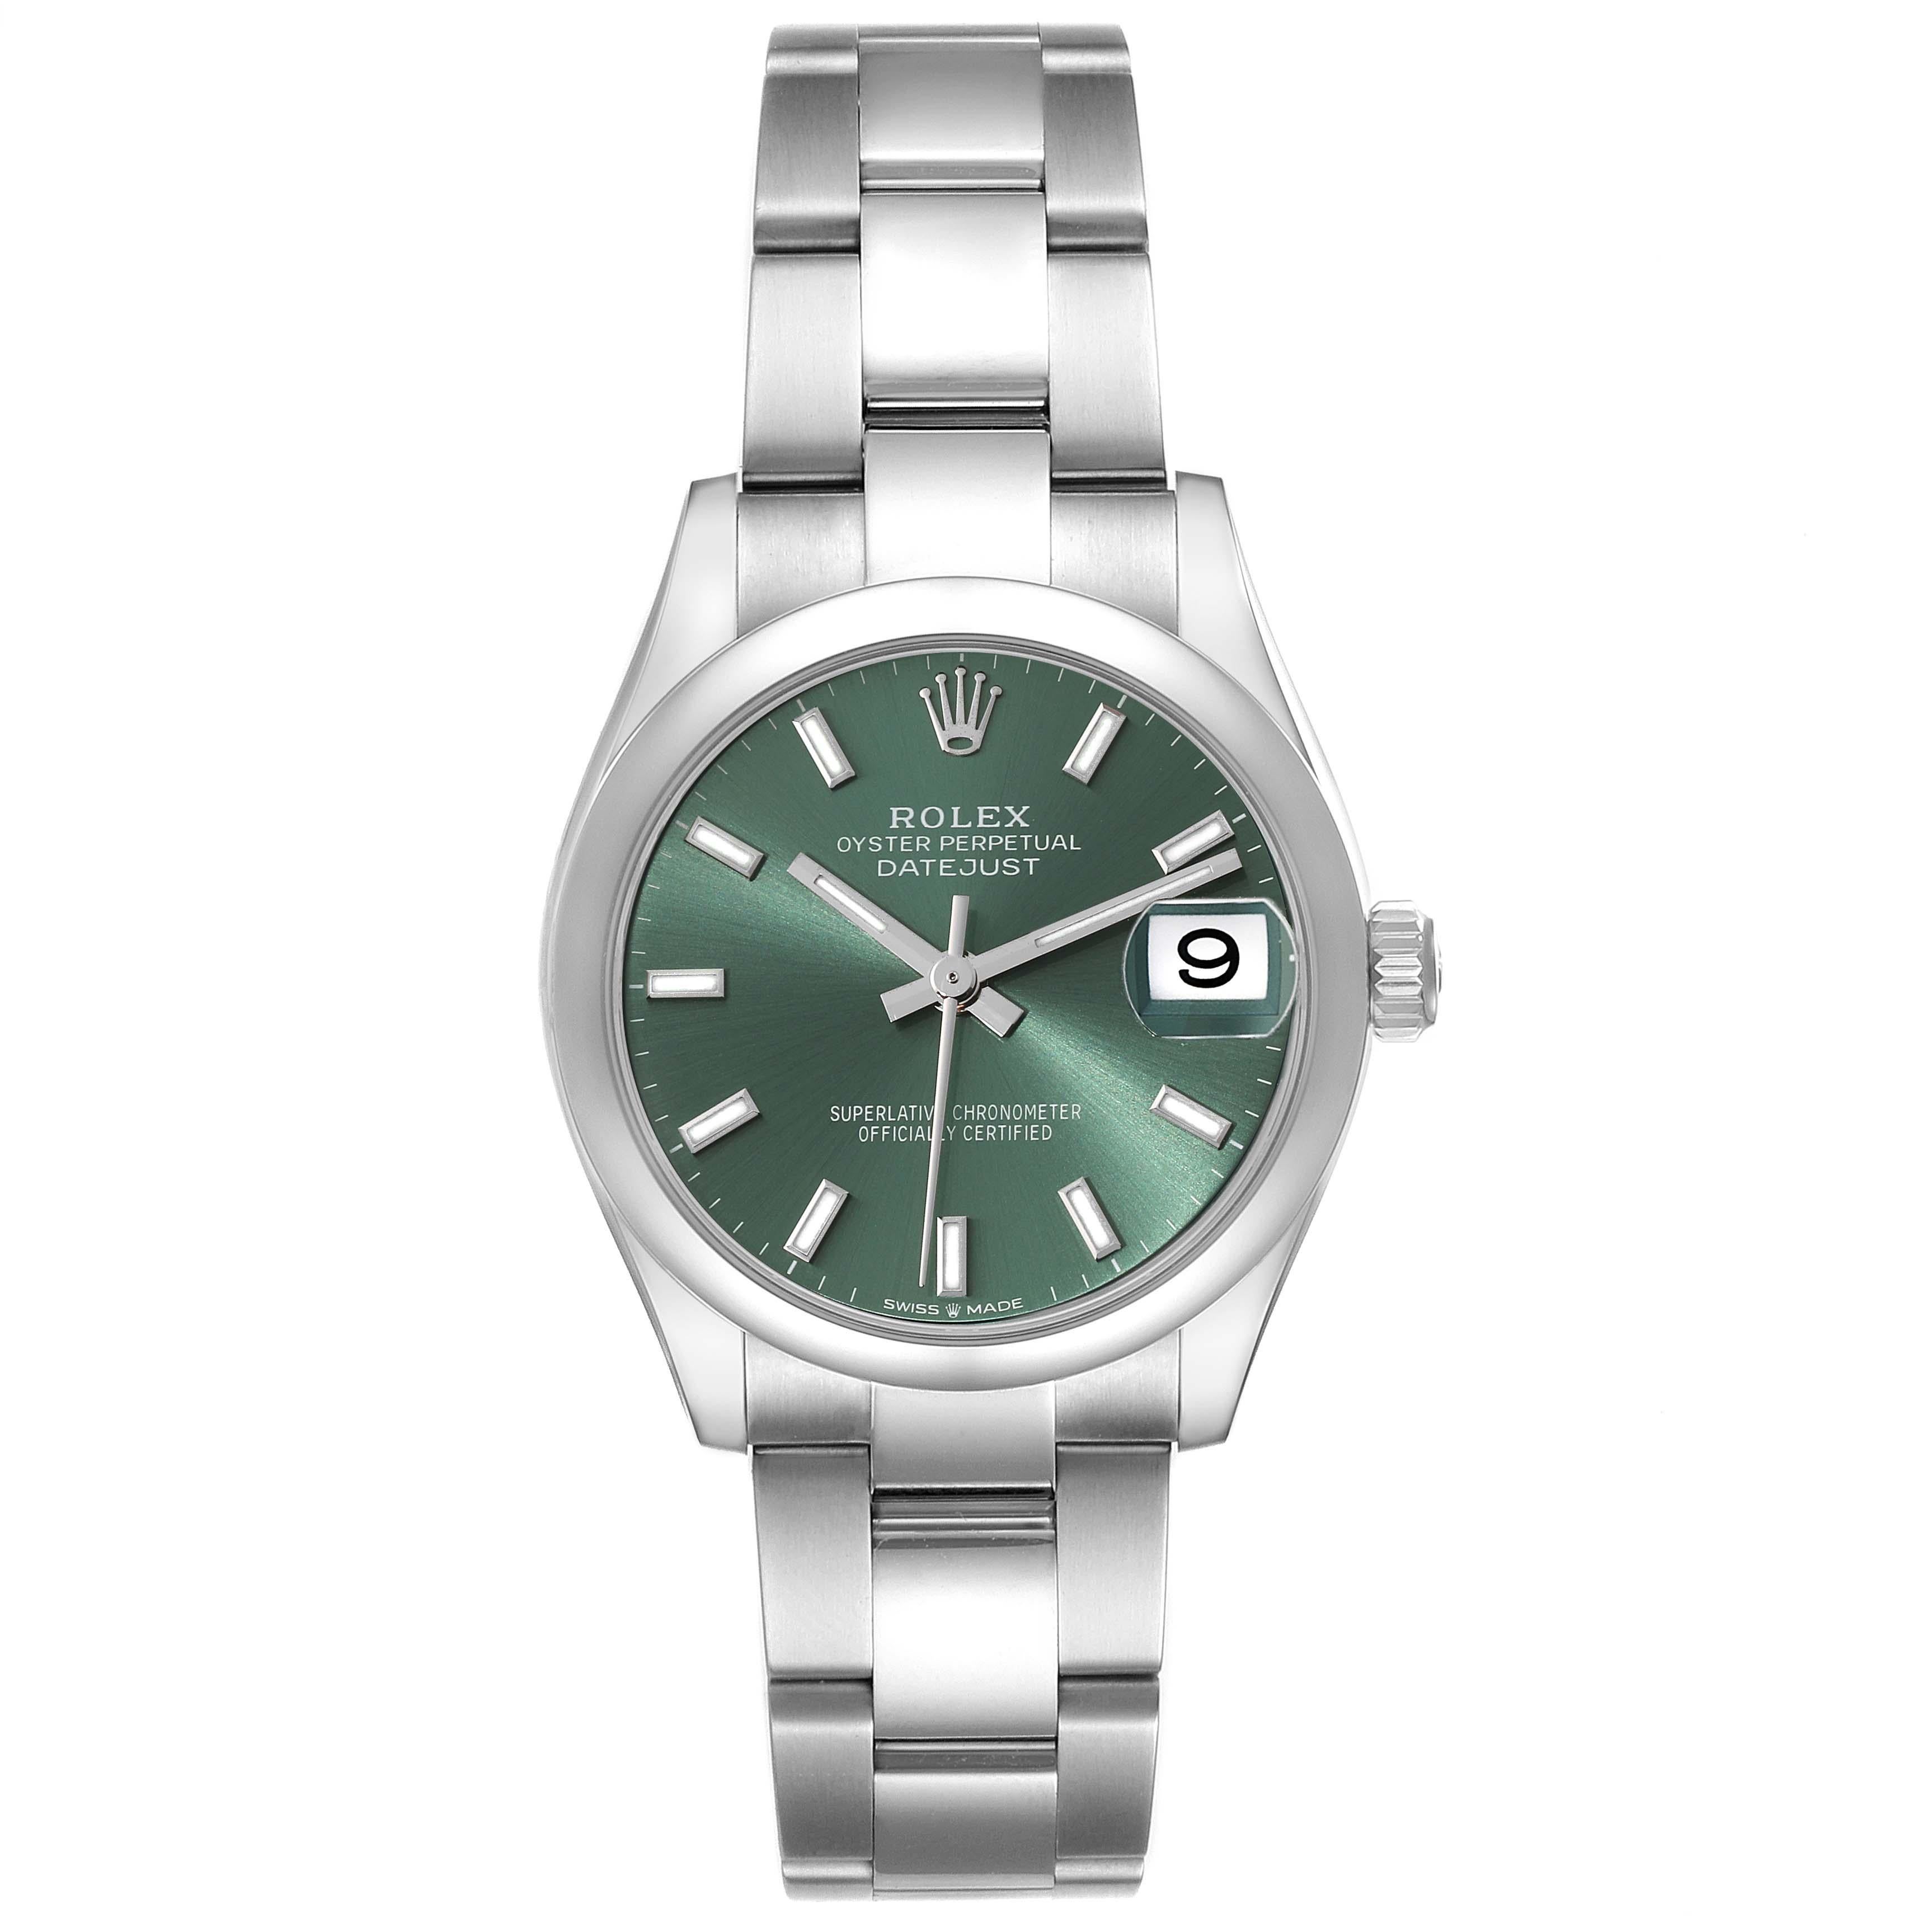 Rolex Datejust Midsize Mint Green Dial Steel Ladies Watch 278240 Unworn. Officially certified chronometer self-winding movement. Stainless steel oyster case 31.0 mm in diameter. Rolex logo on the crown. Stainless steel smooth bezel. Scratch